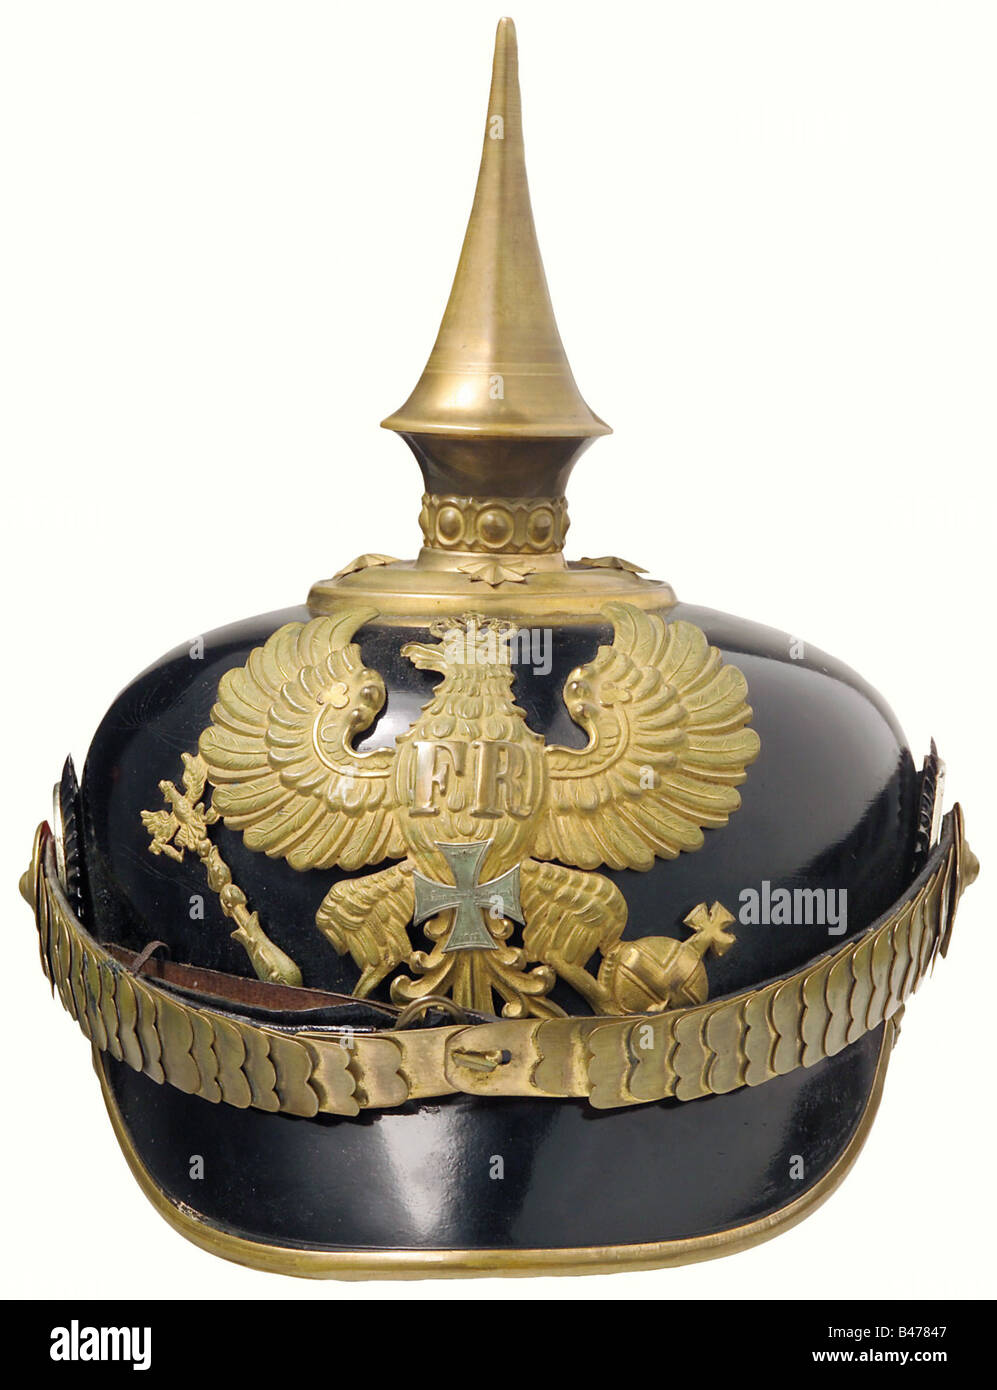 A model 91 helmet for reserve officers, of the line infantry. Black lacquered fiber bowl with gilded trims. Plate with the silver reserve cross. Flat metal chinscales on rosettes, and both cockades. Beige ribbed silk lining and brown sweatband with marks of wear. Size 55. Complete with a field grey cover and in the protective case (straps torn). There is also the full dress sash of silver weaving interwoven with black (darkened). historic, historical, 19th century, Prussian, Prussia, German, Germany, militaria, military, object, objects, stills, clipping, clipp, Stock Photo